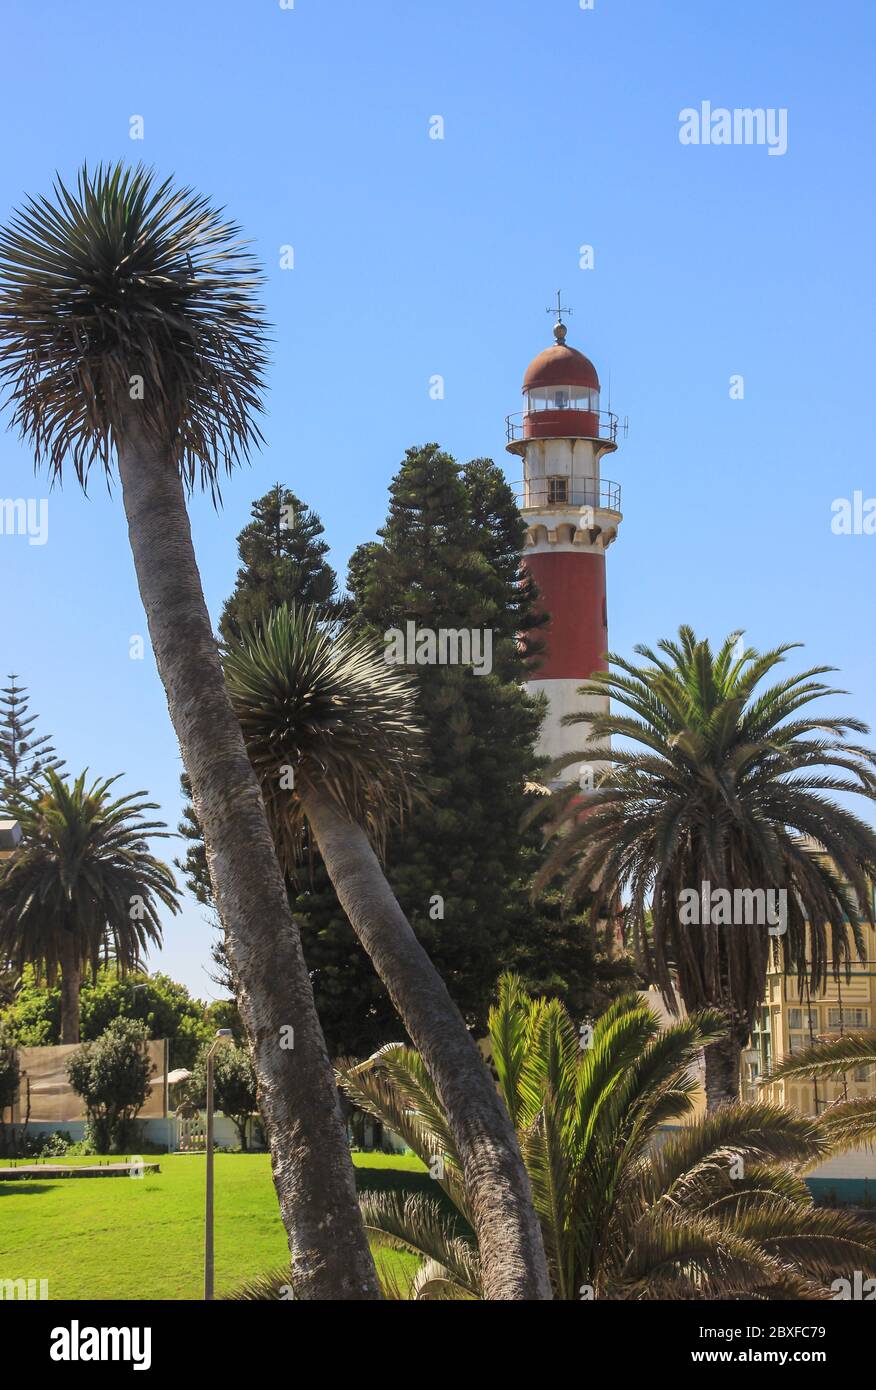 Swakopmund, Namibia - April 18, 2015: Old German red and white lighthouse, which is called 'bacon' surrounded by palm trees Stock Photo